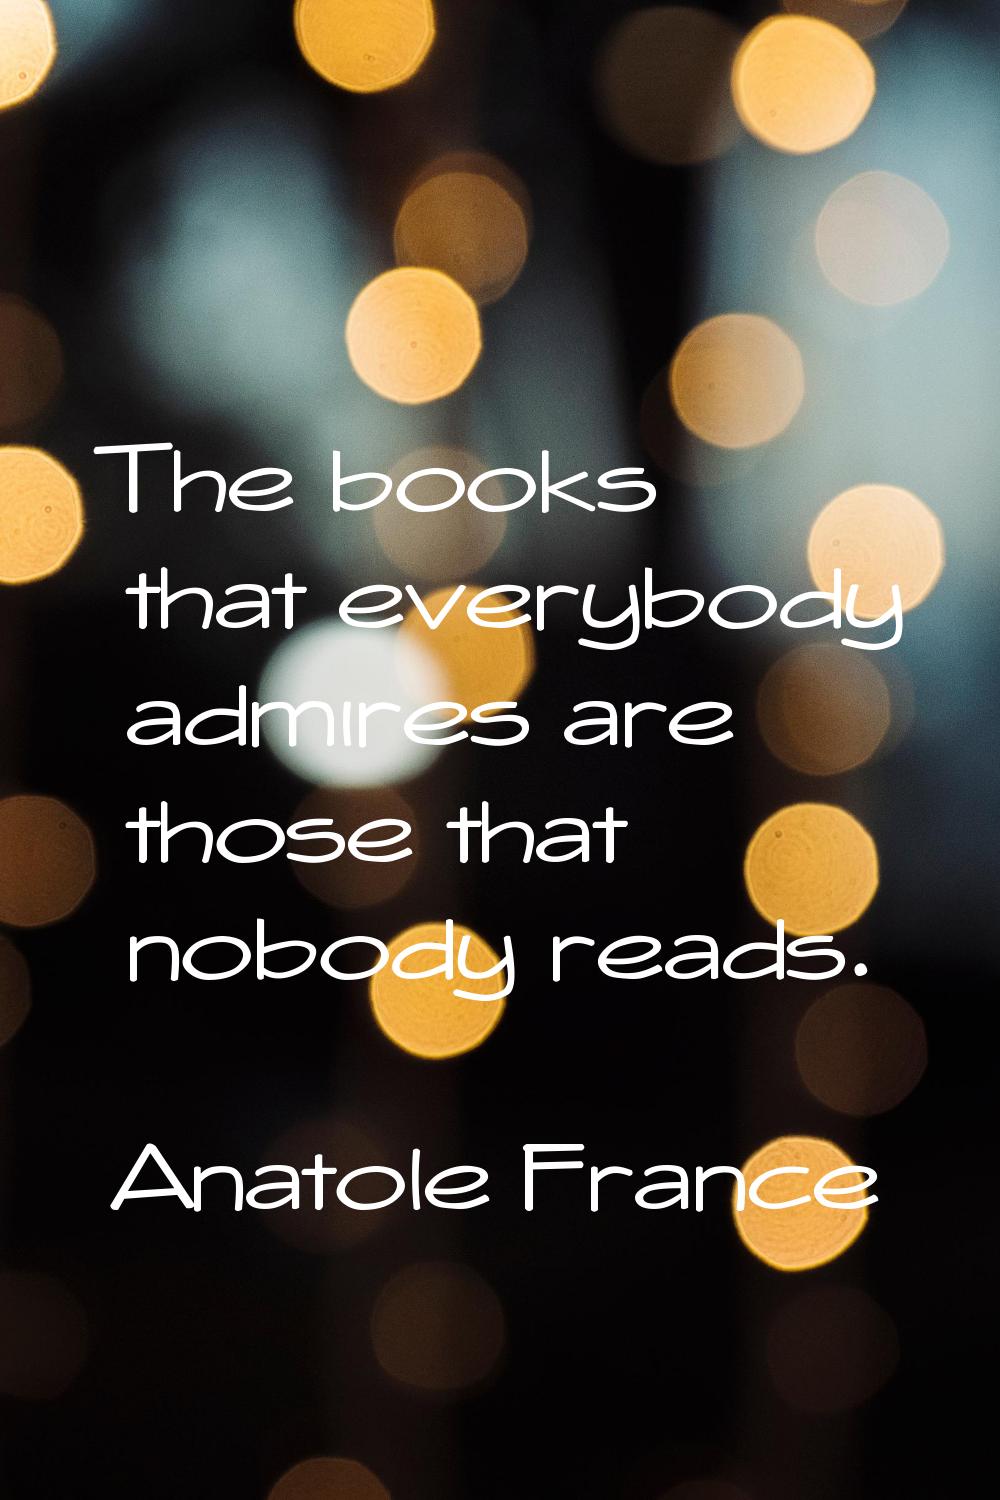 The books that everybody admires are those that nobody reads.